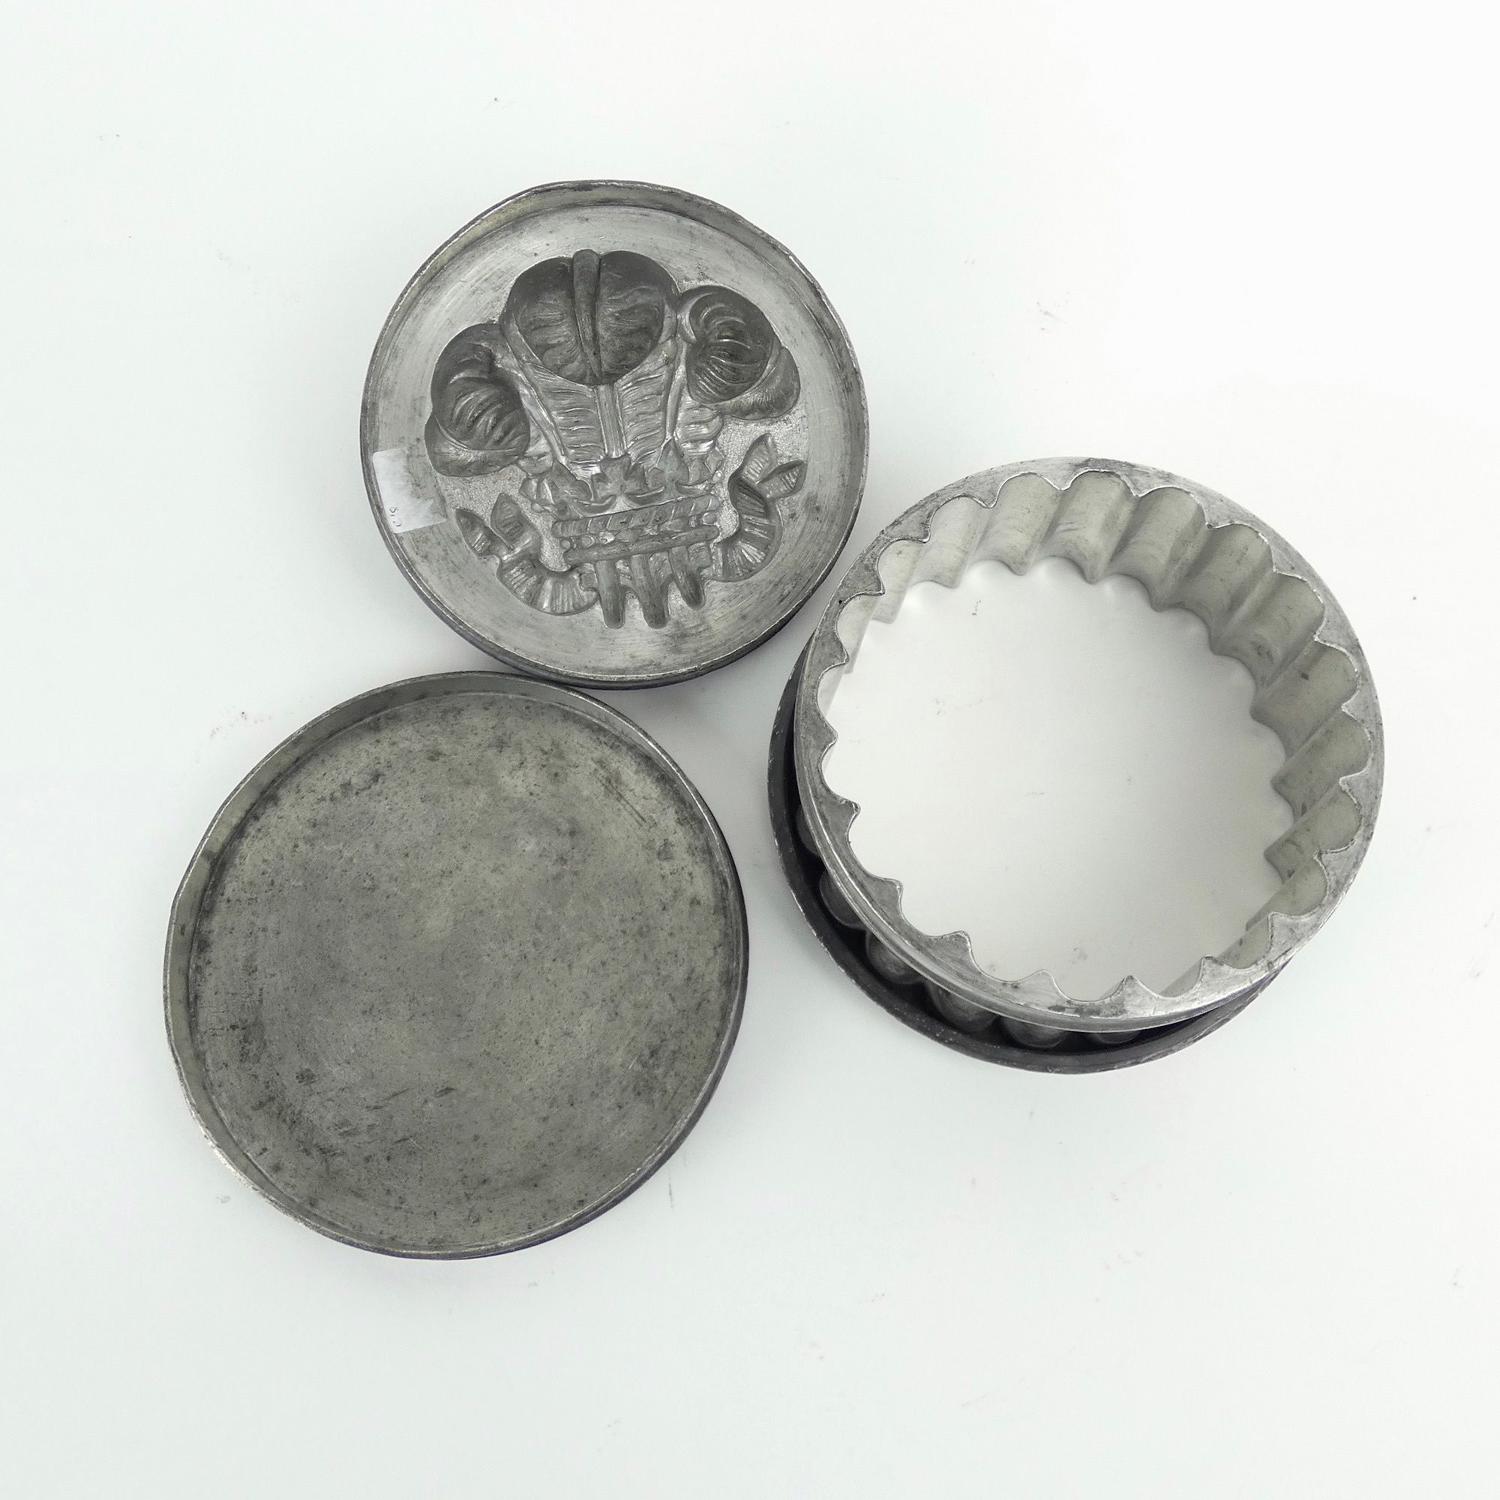 Pewter 'Prince of Wales feathers' ice cream mould